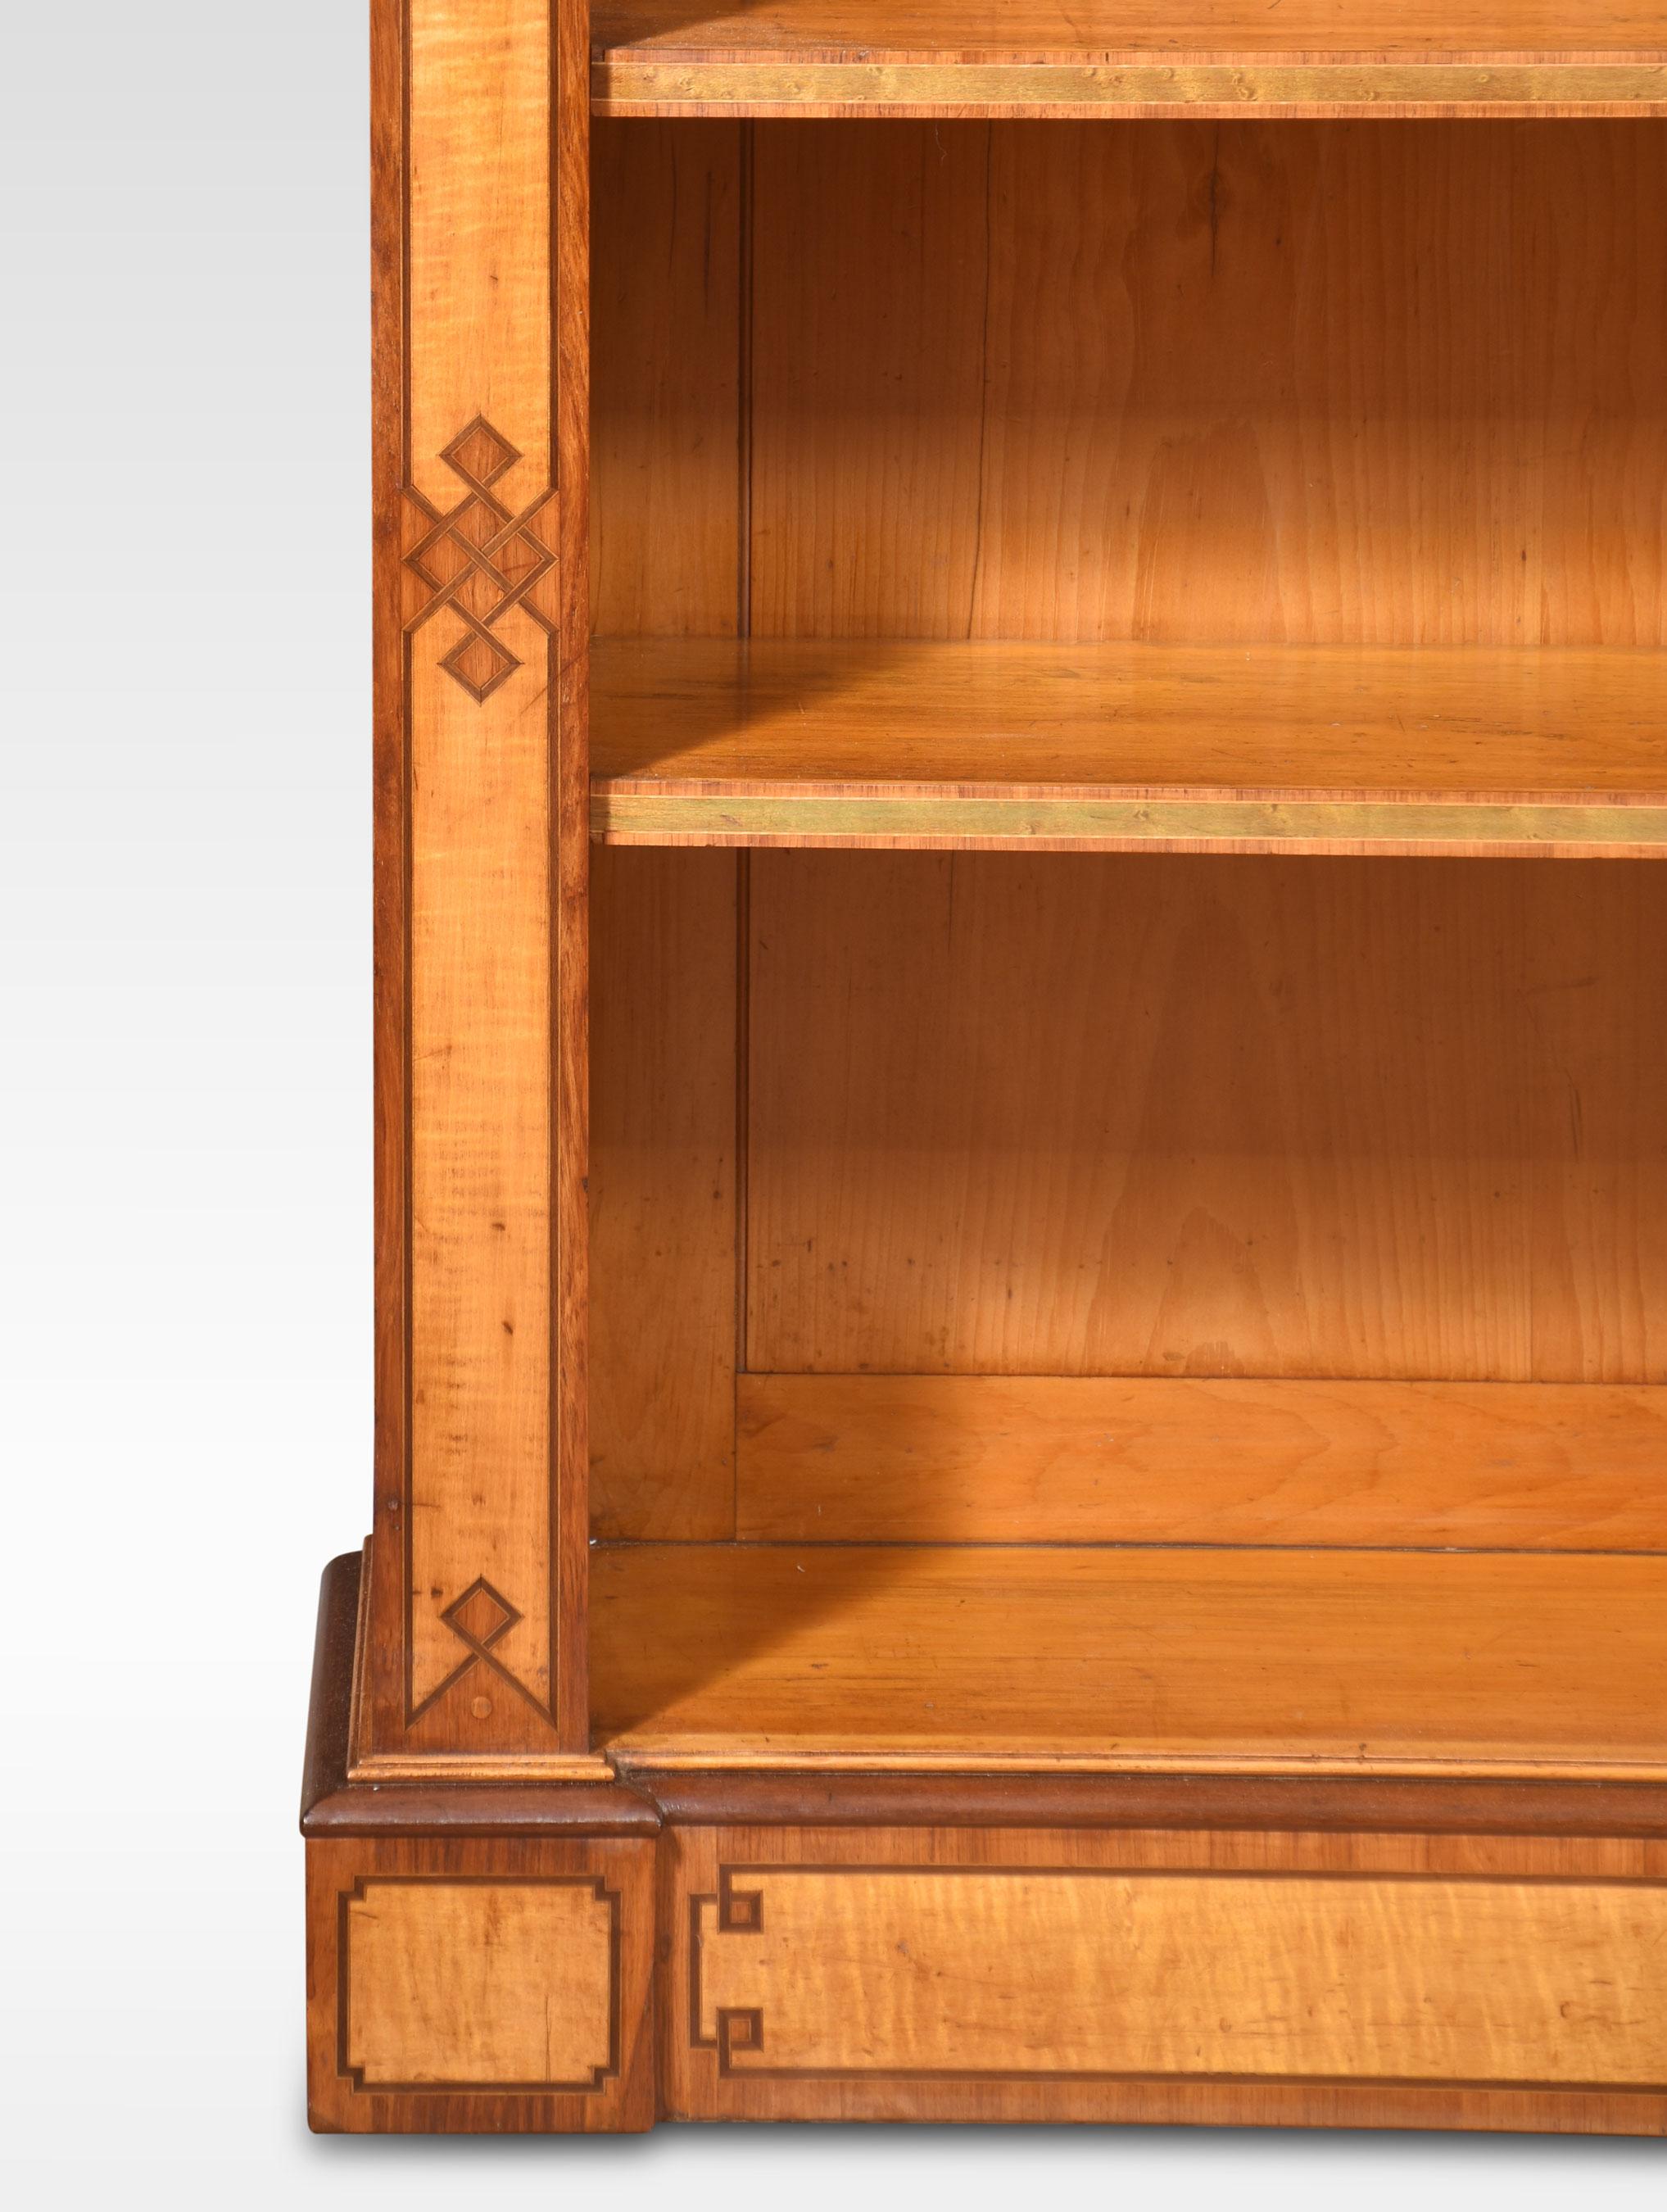 Satinwood open bookcase By C Hindley & Sons, the large rectangular top with inlaid detail and moulded edge to the adjustable shelved interior flanked by further inlaid columns. All raised up on a plinth base.
Dimensions
Height 40 Inches
Width 56